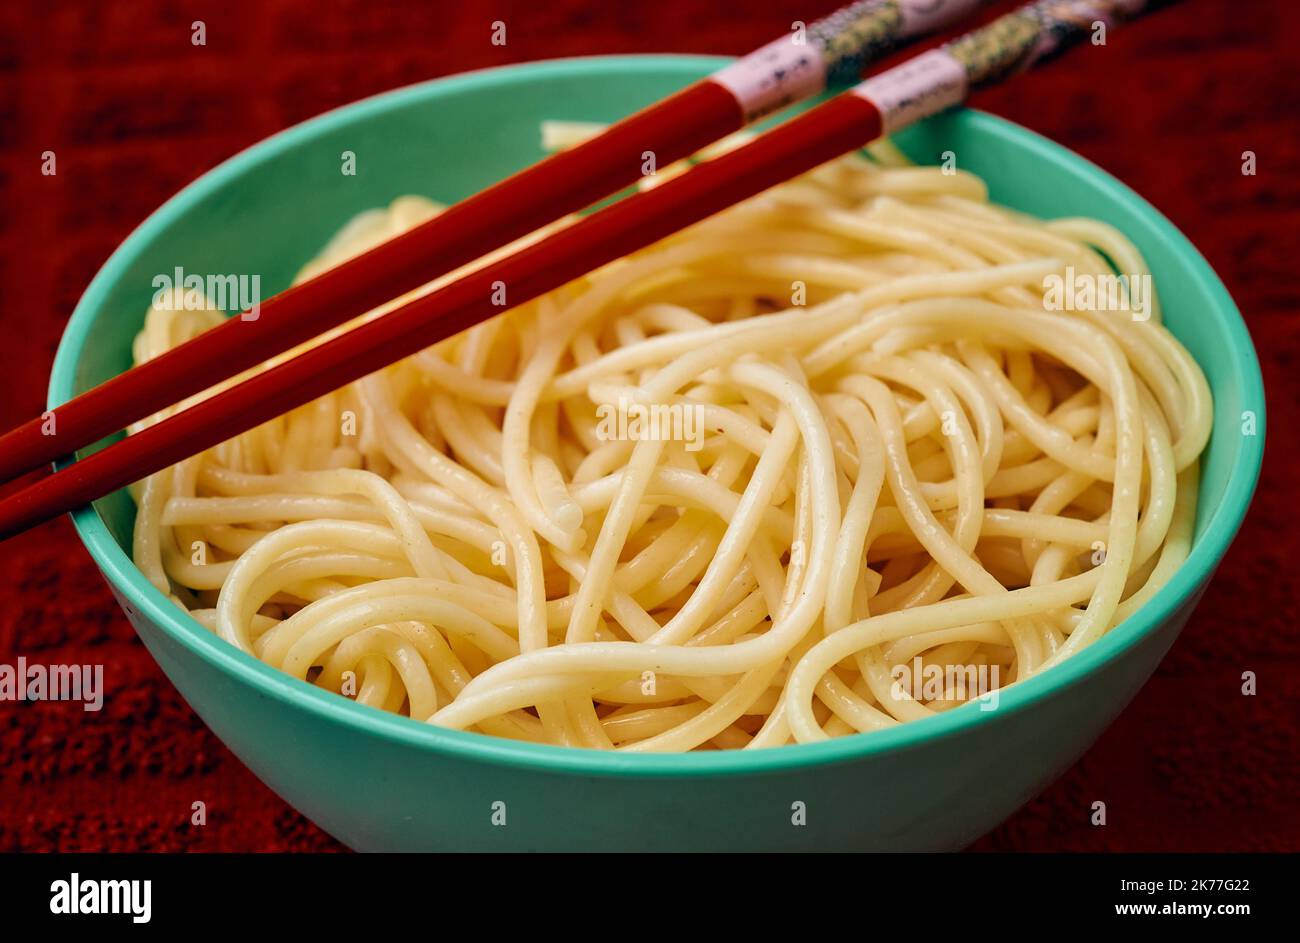 Organic semolina pasta is served in a small teal bowl with red chapstick over a red kitchen towl Stock Photo